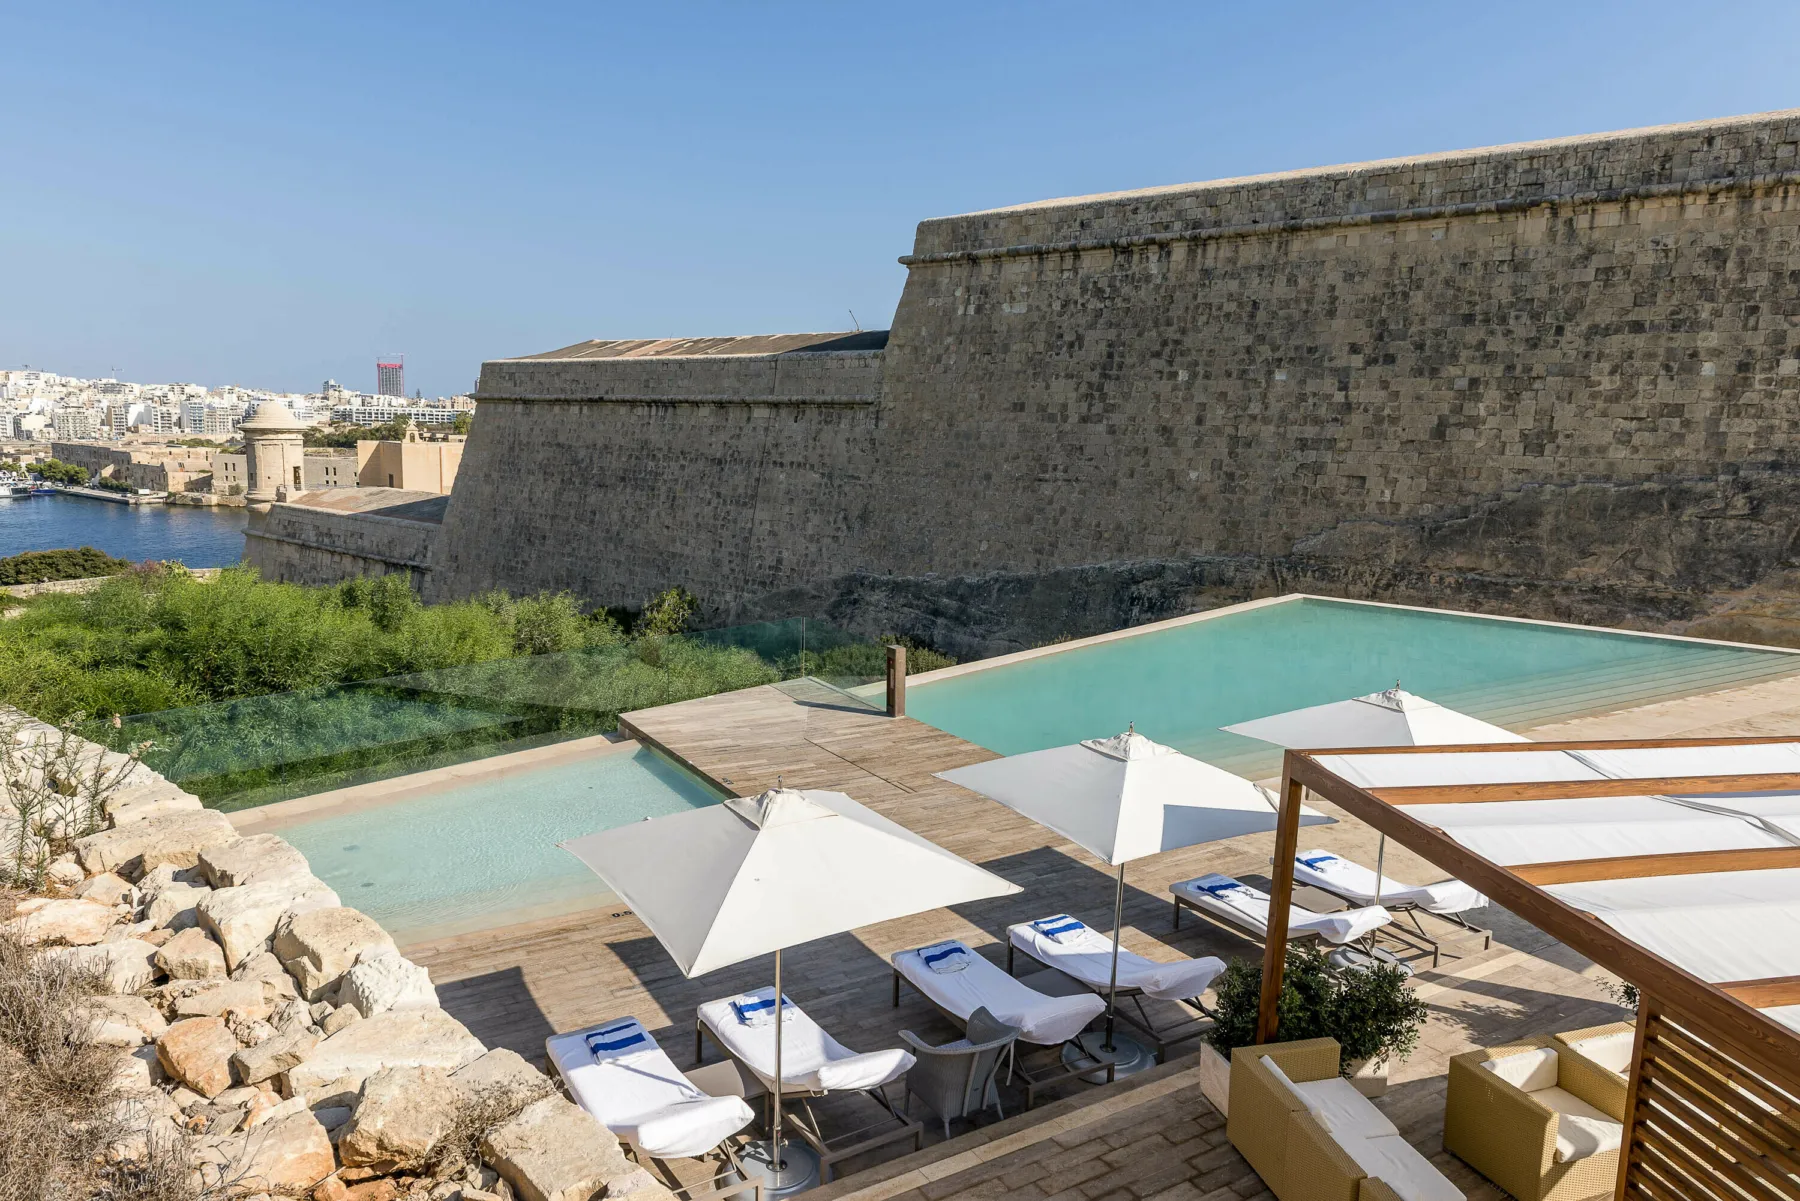 The outdoor pool and terrace at Hotel Phoenicia, Malta. Bordered by a historic city wall, the terrace has views across Valletta and a garden. Loungers and parasols are arranged by the pool.